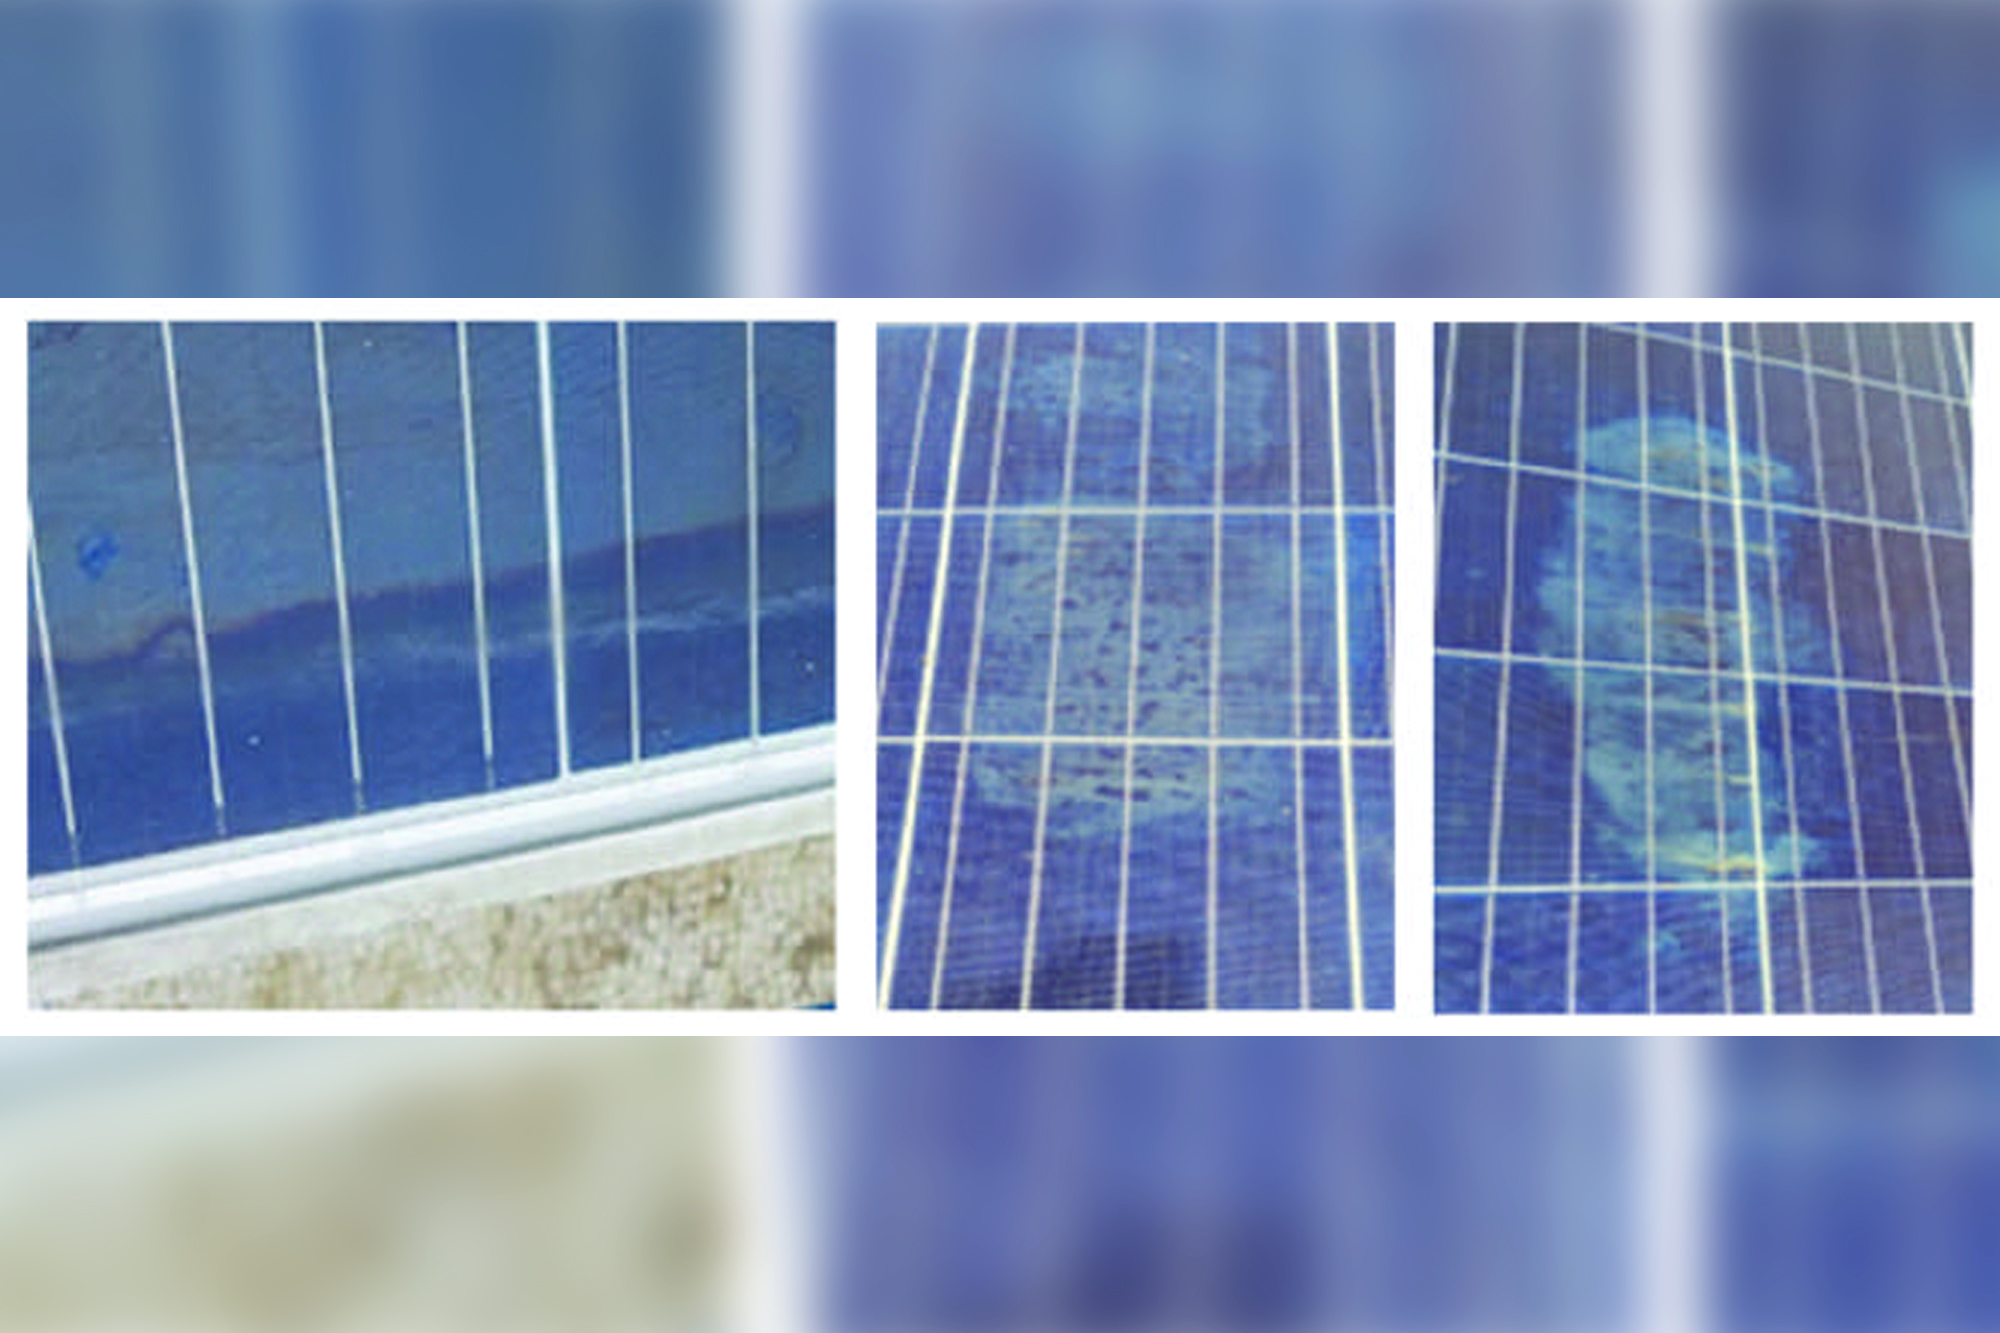 Durability of anti-reflective coatings of solar glass